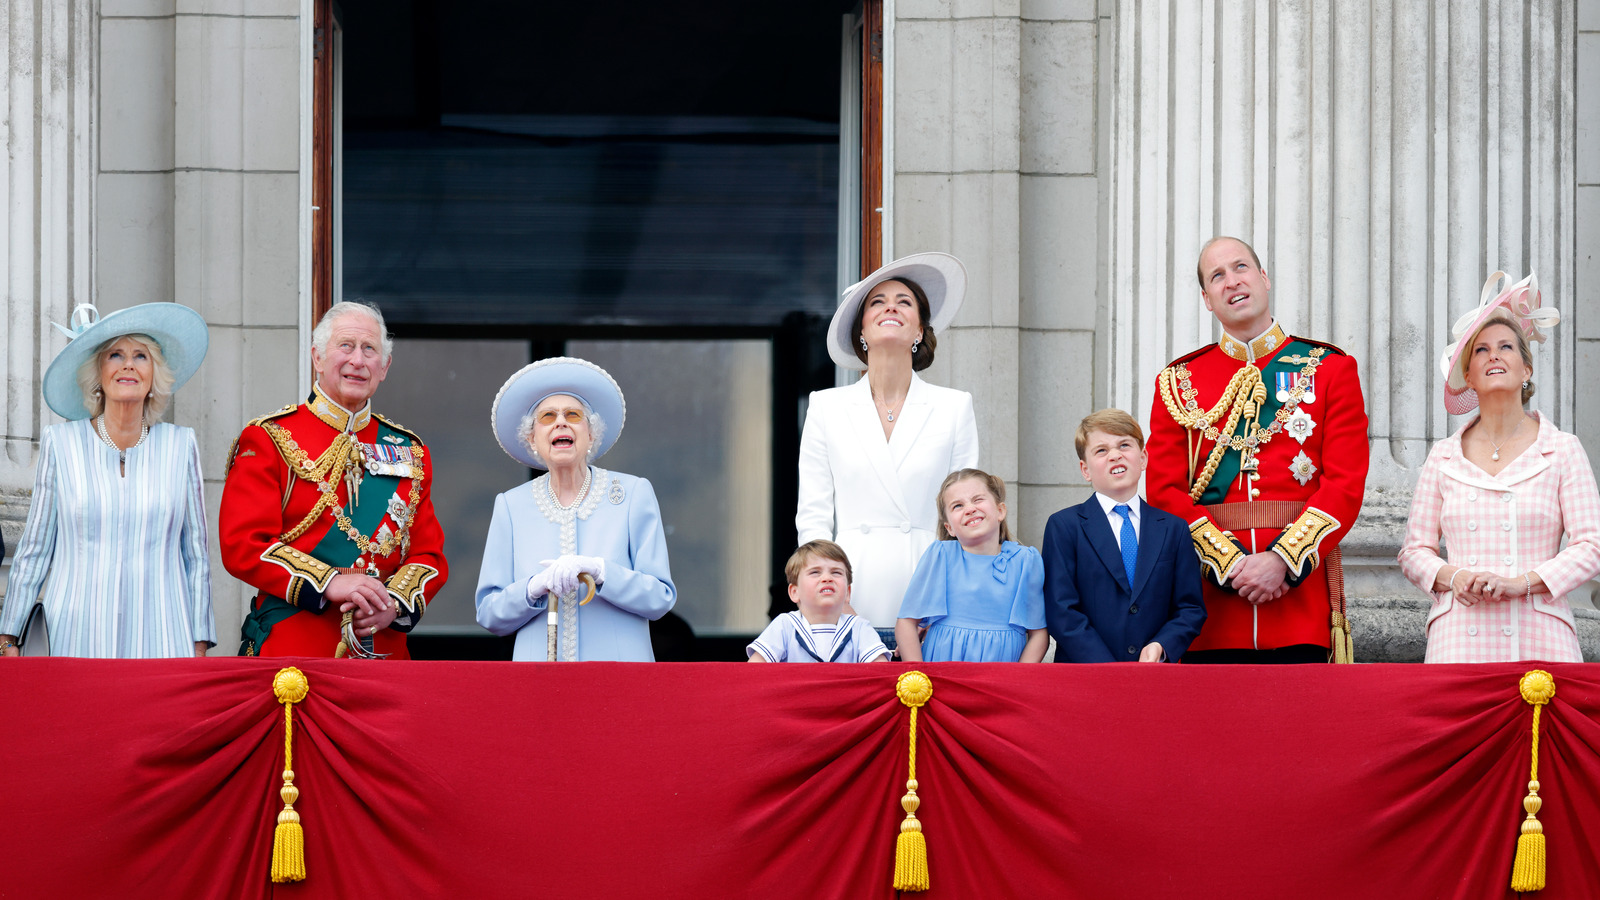 Each Royal's First Trooping The Colour Appearance